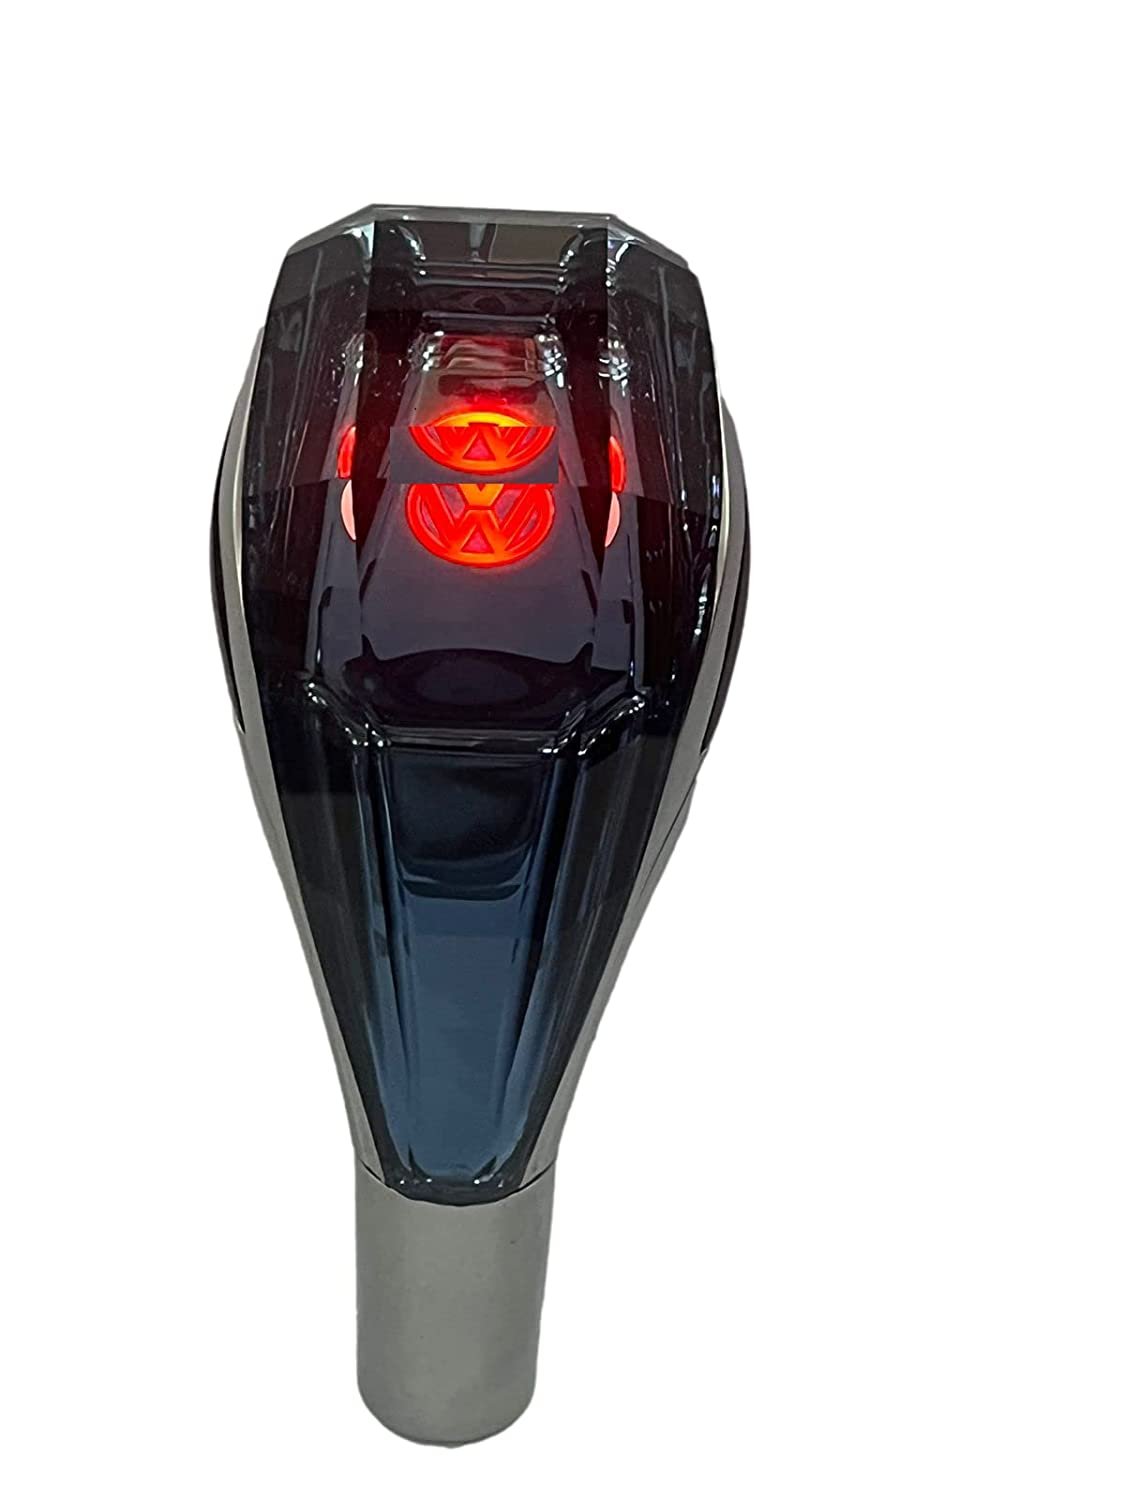 Crystal Gear Shift knob Touch Activated Ultra LED Light Illuminated with Button-Less Operated Shifter Fit with Polo, Passat, Vento, Taigun,Virtus Image 